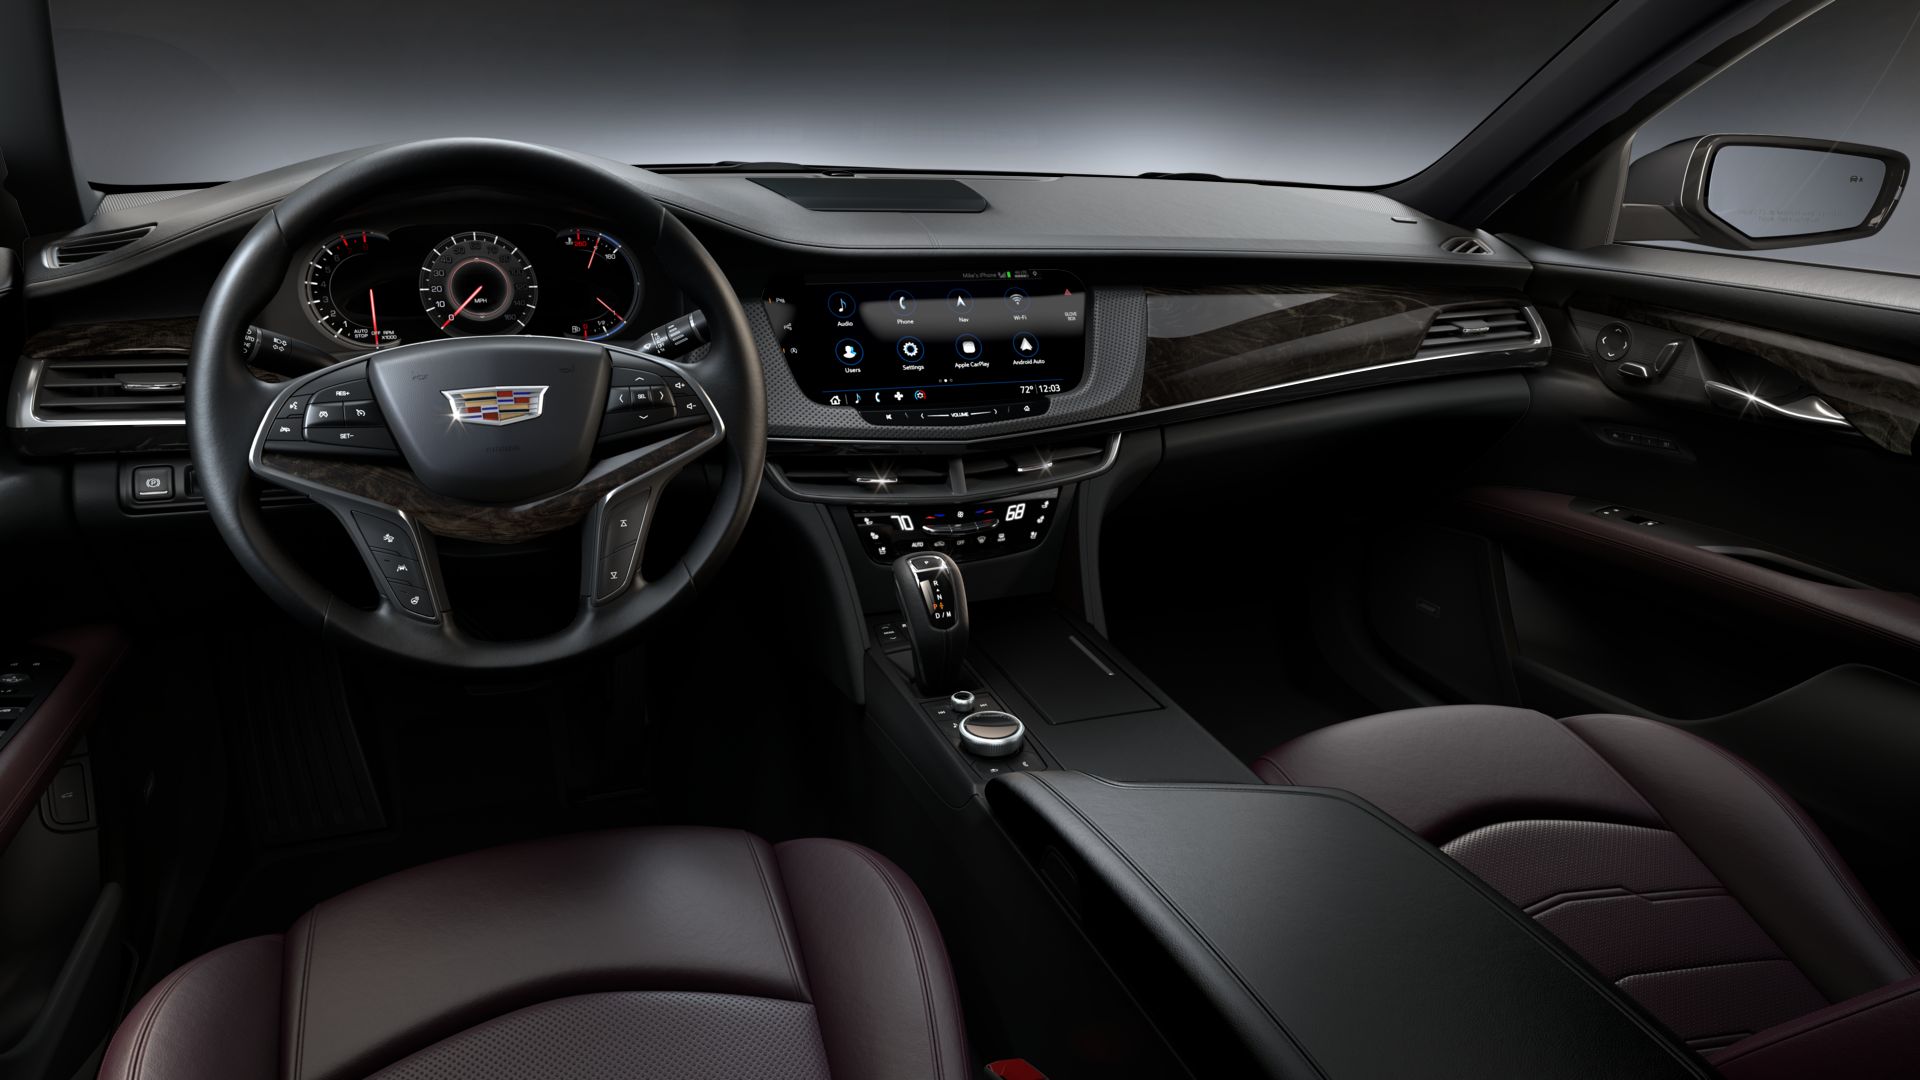 2019 Cadillac CT6 Interior Colors | GM Authority